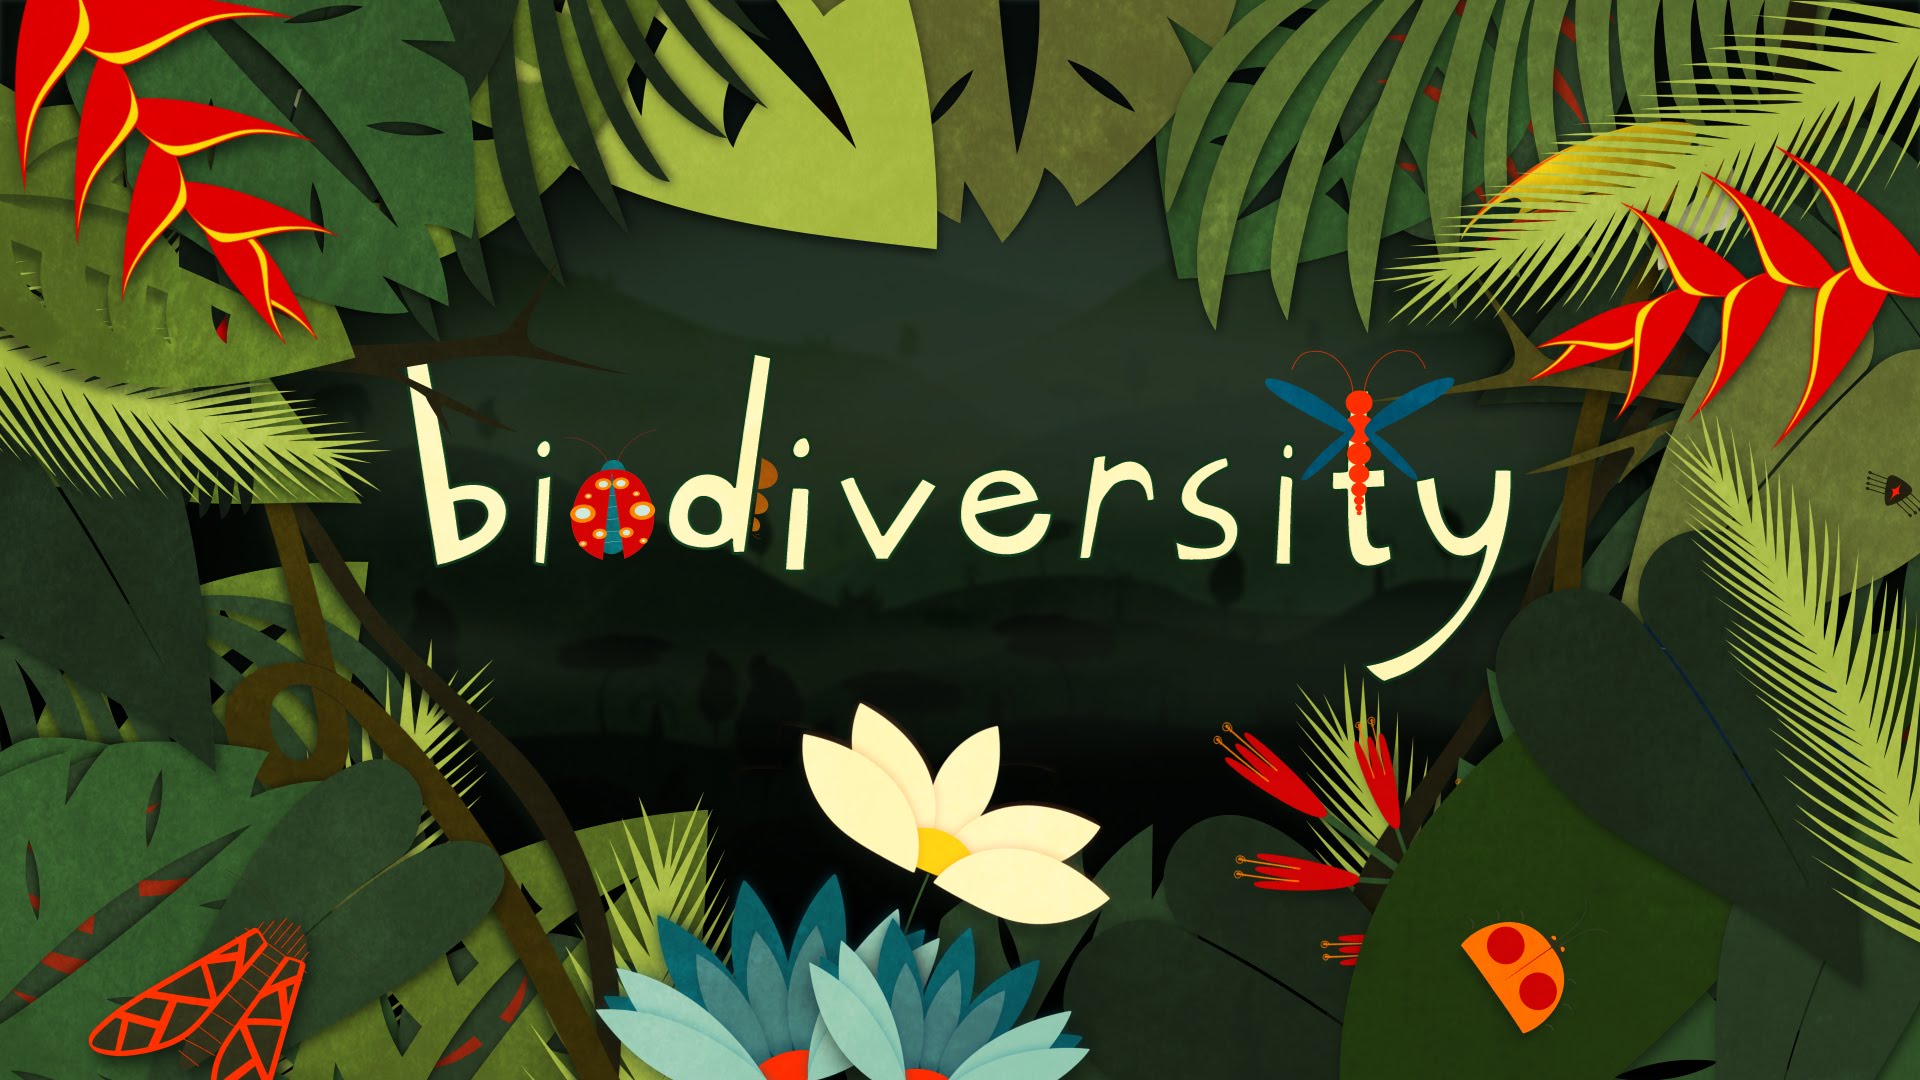 research topics about biodiversity